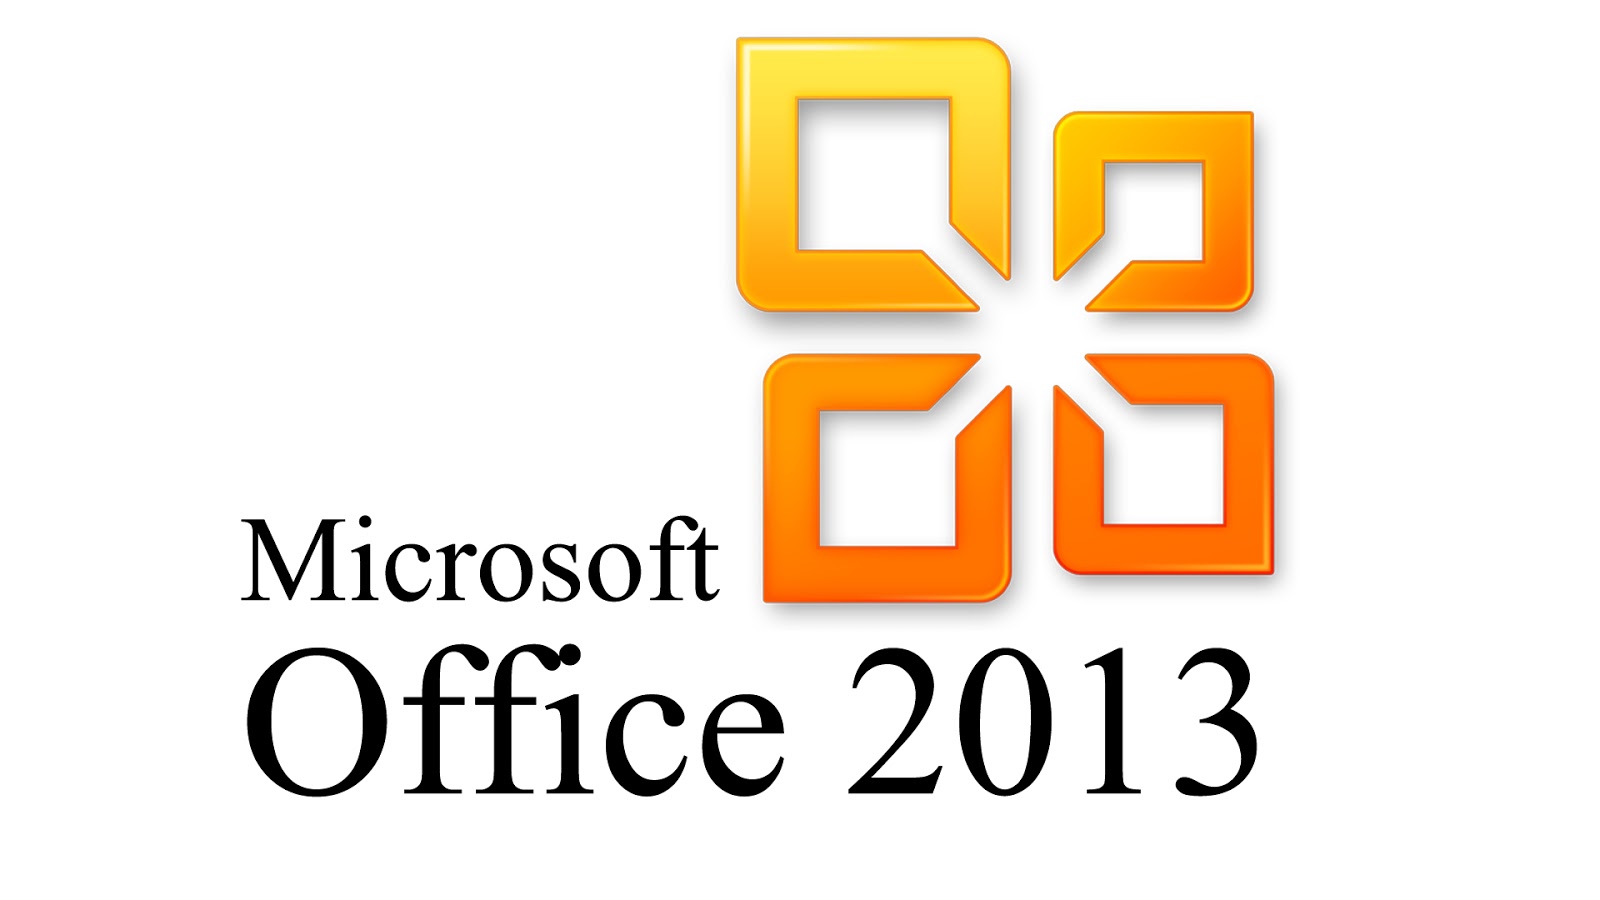 Microsoft office 2013 crack only download